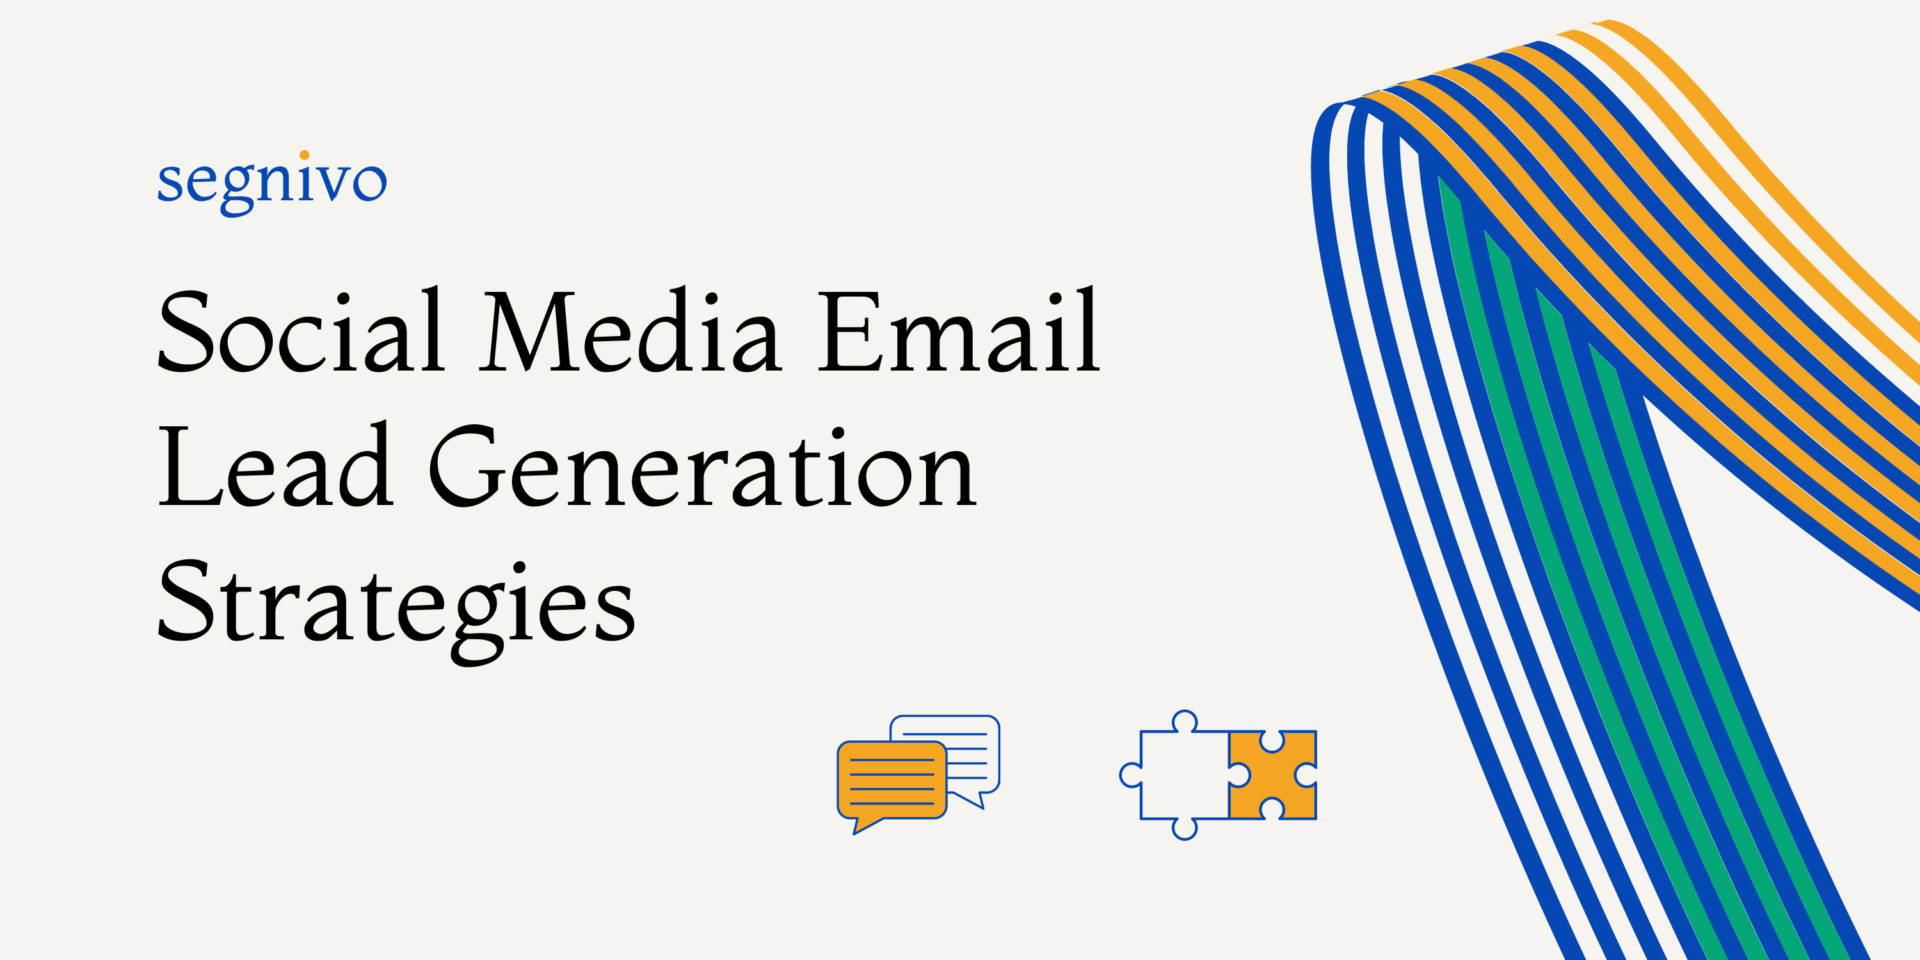 Email Lead Generation